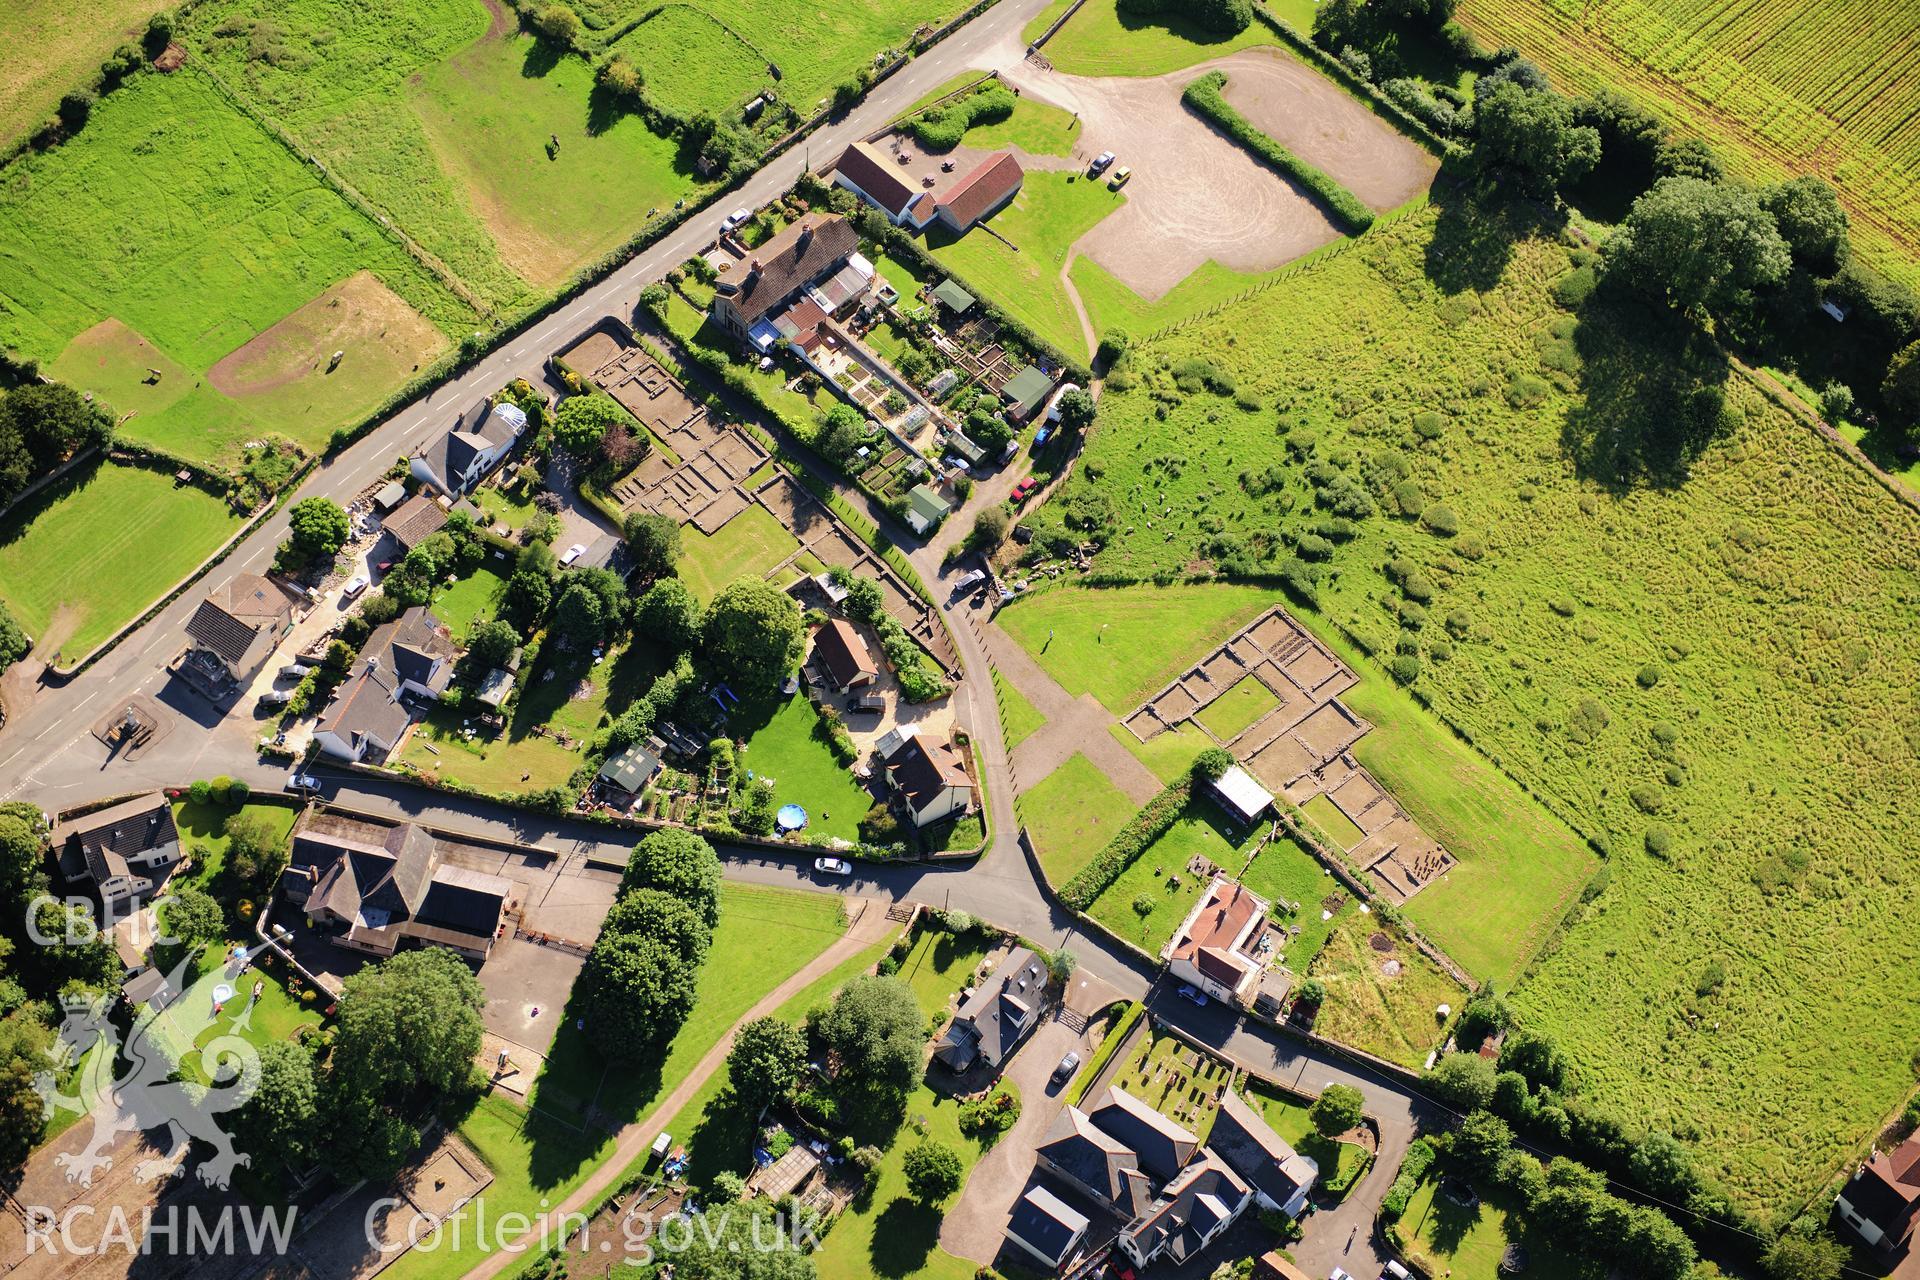 RCAHMW colour oblique photograph of Caerwent Roman town, Pound Lane shops and town house. Taken by Toby Driver on 24/07/2012.